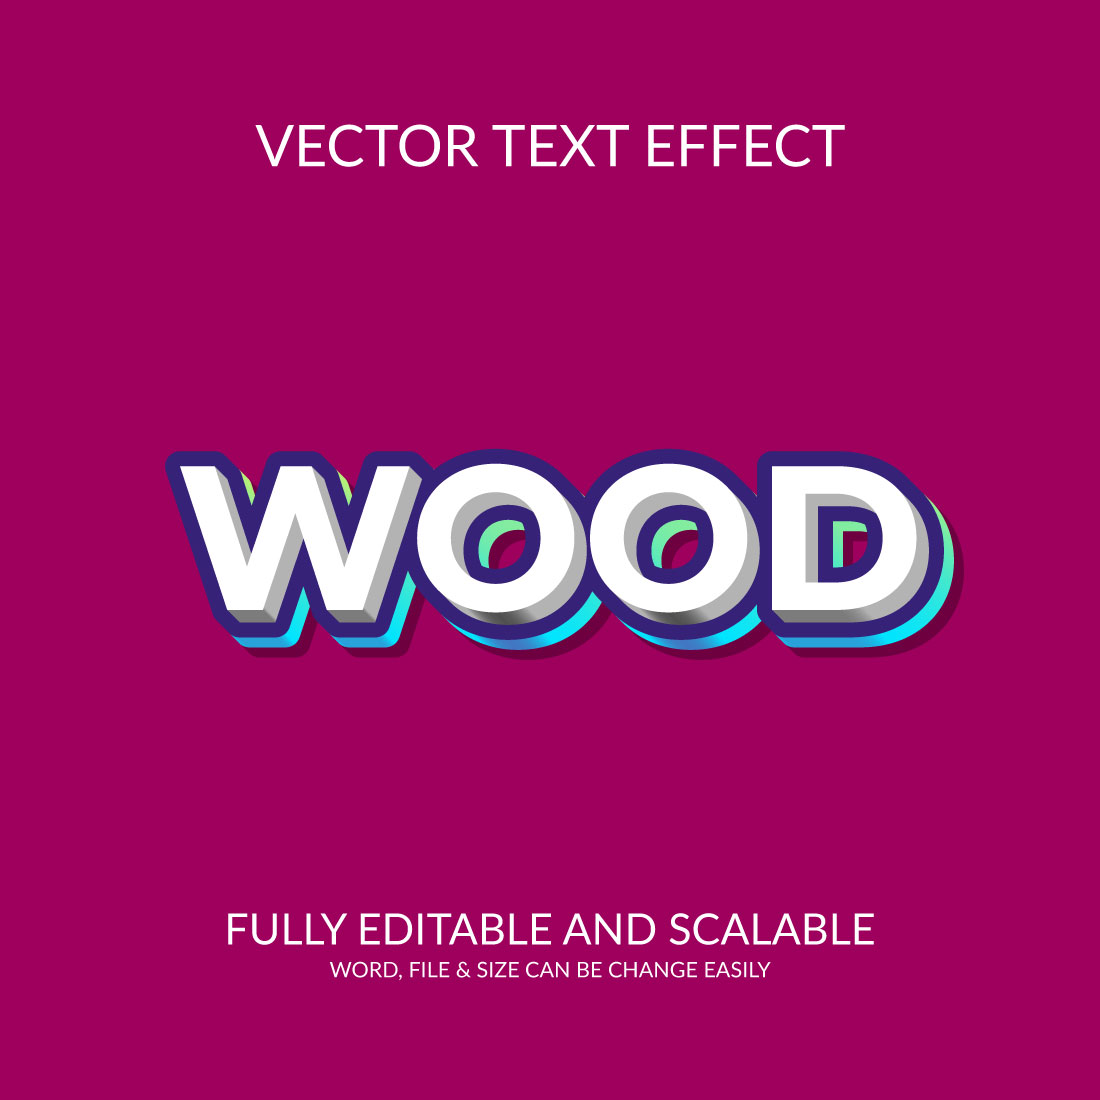 Wood 3d text effect template preview image.